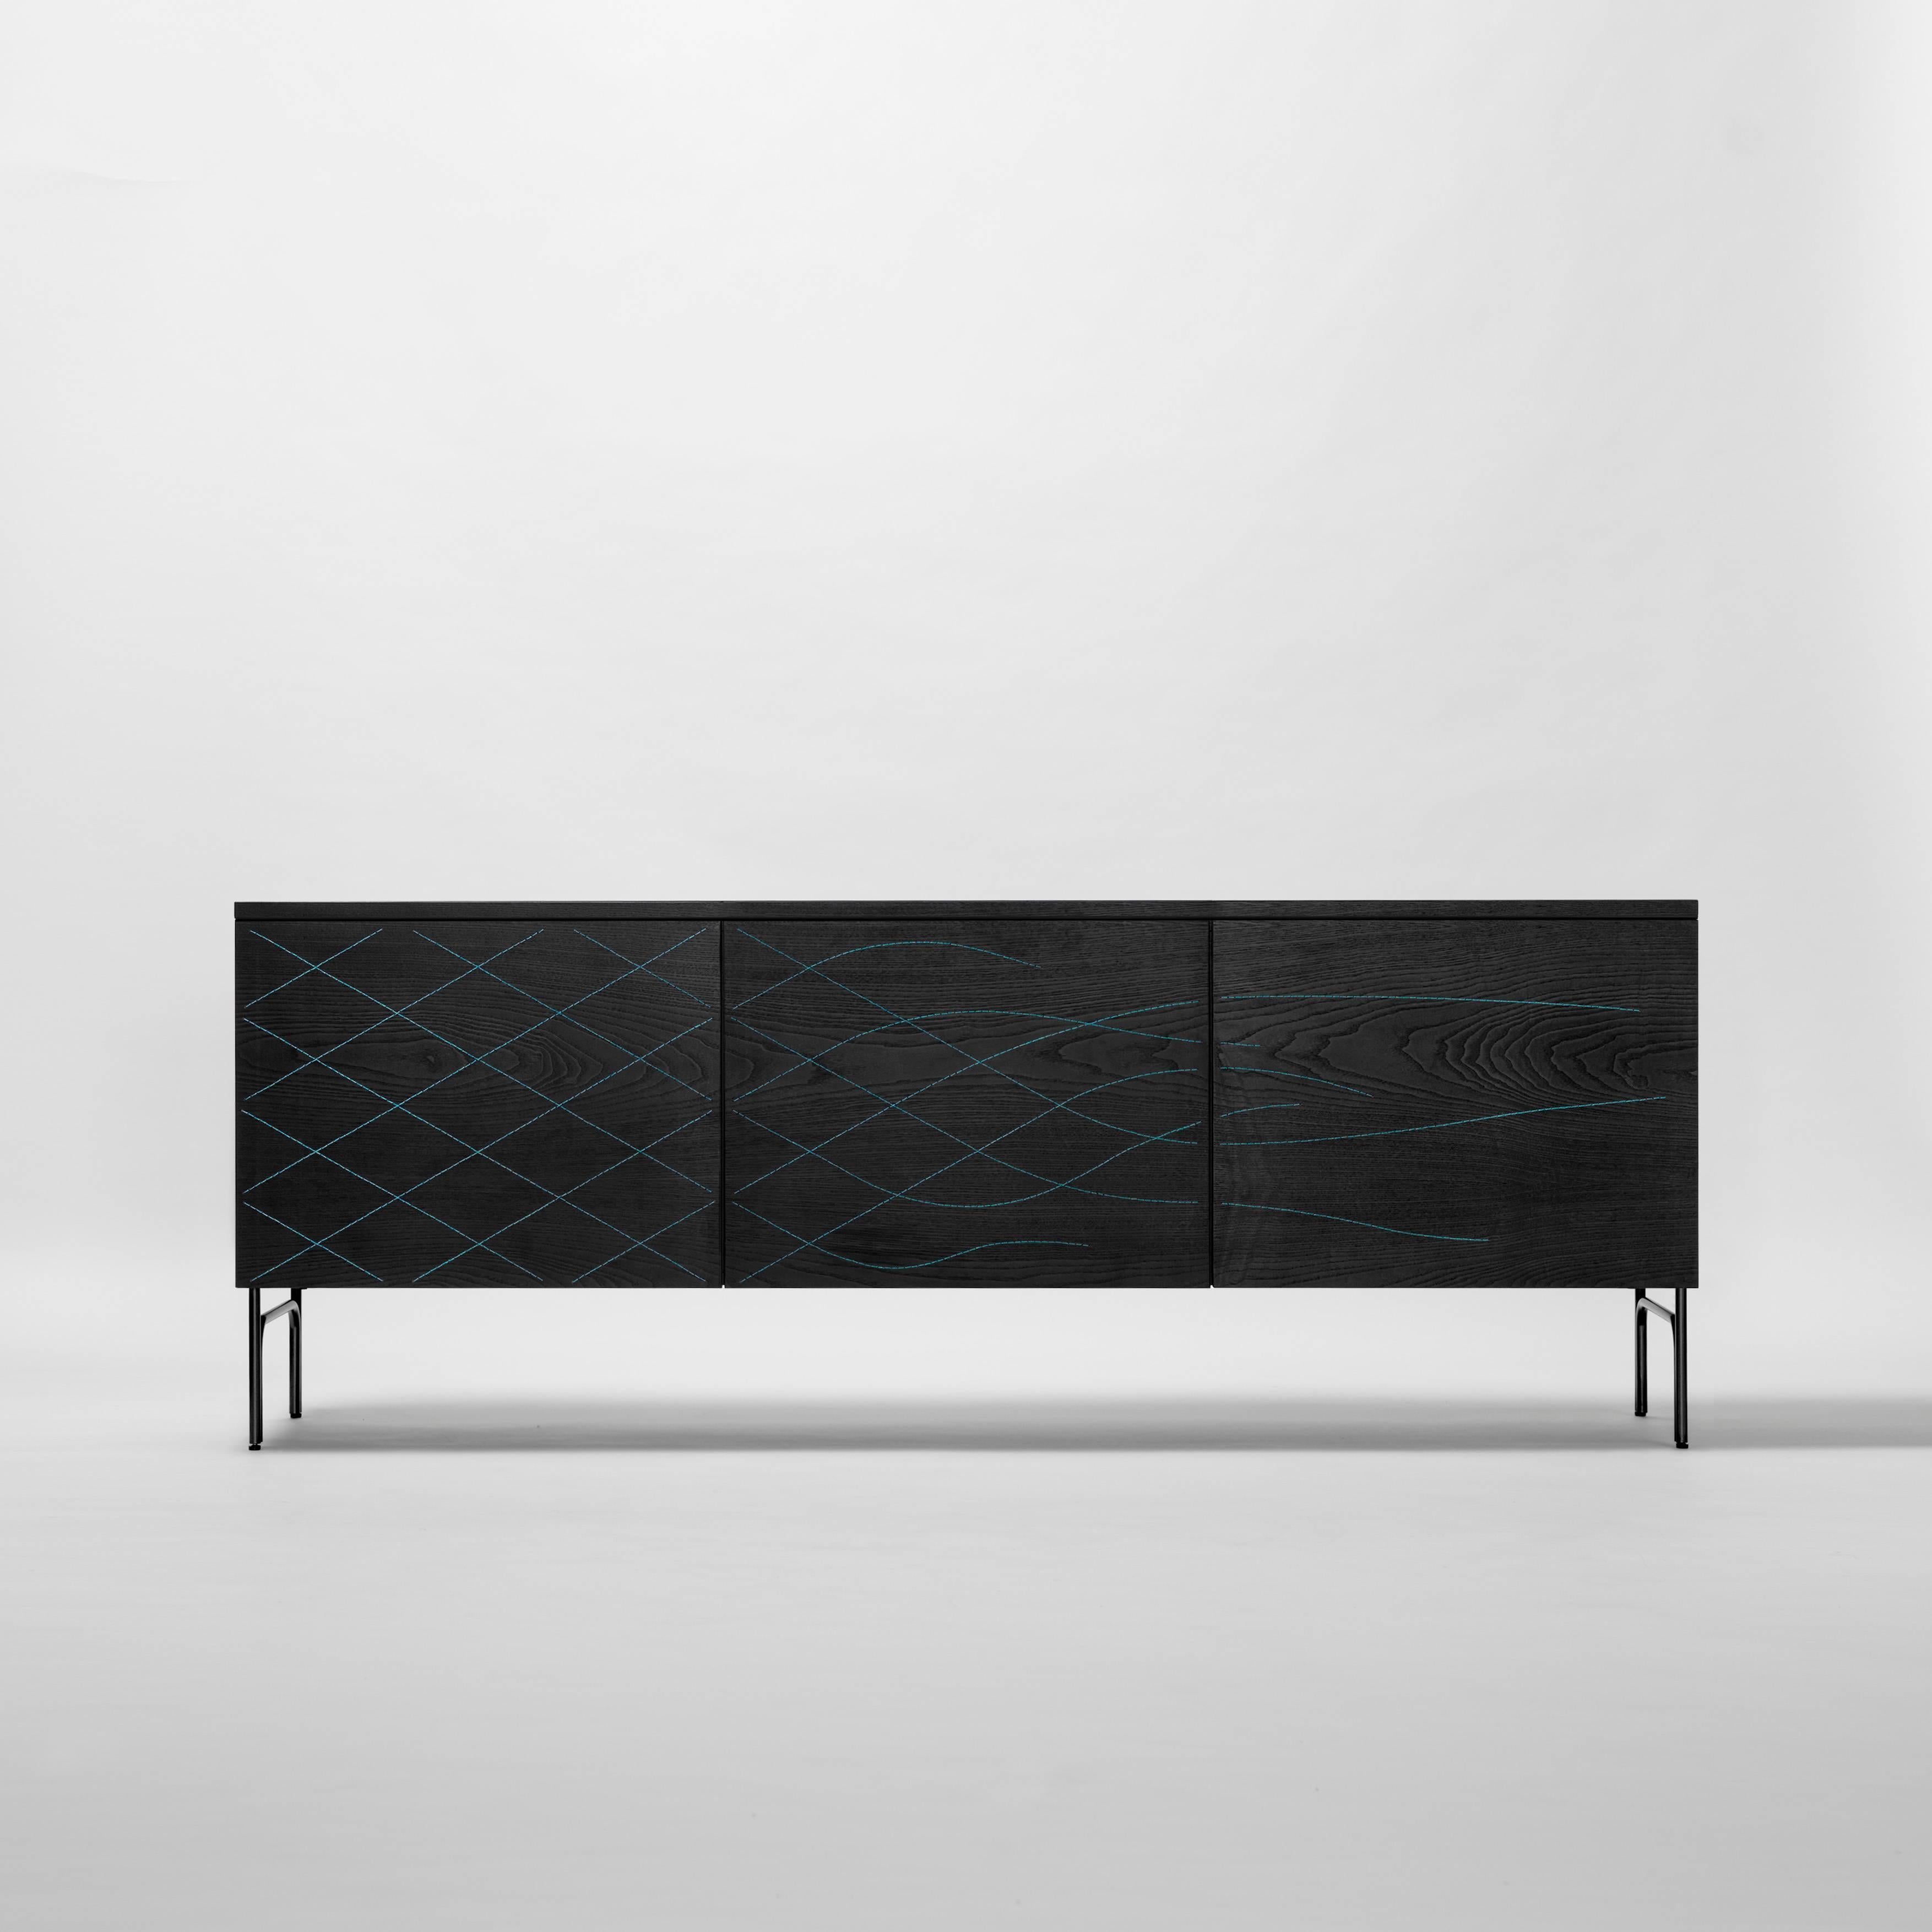 Cabinet designed by Färg & Blanche manufactured by BD Barcelona

Sideboard in stained black. Structure in anodic black lacquered steel. Doors sewn in black, blue or orange thread.

     